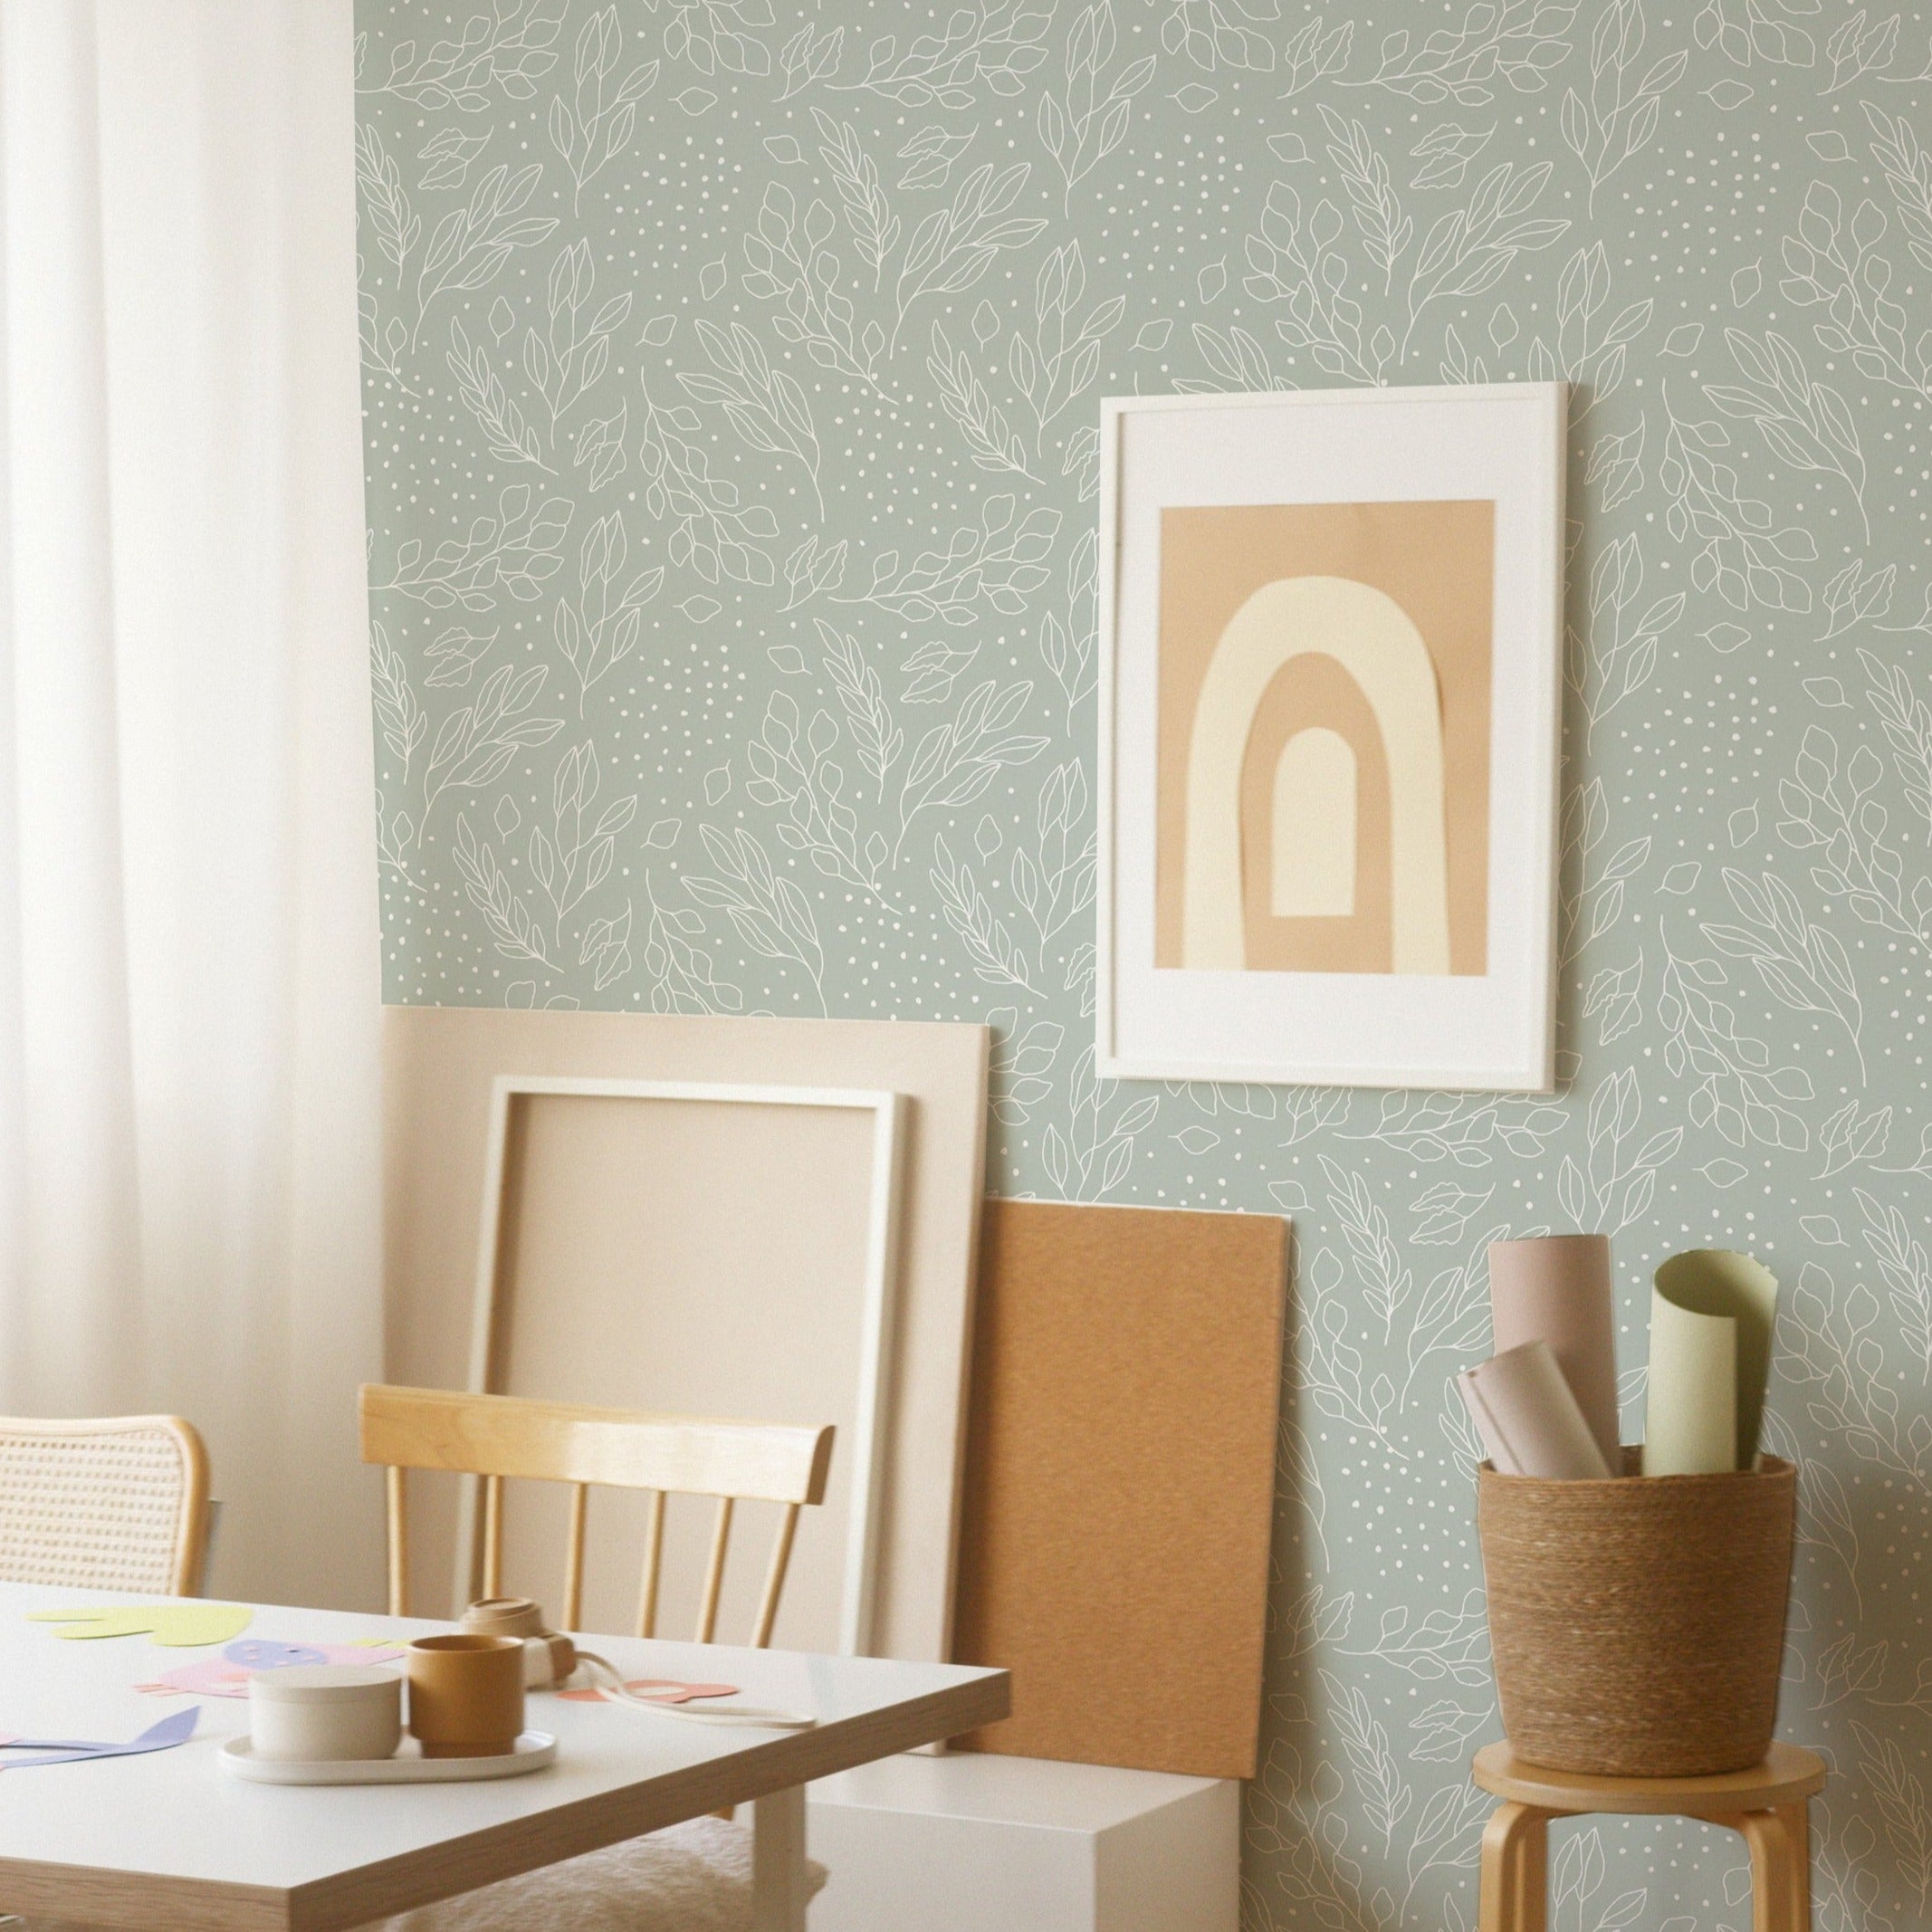 Creative workspace enhanced by the Ferns and Leaves Wallpaper, which adds a calm and nature-inspired vibe with its soft green leafy pattern. The scene includes a simple wooden desk, a chair, and inspirational art, ideal for fostering creativity